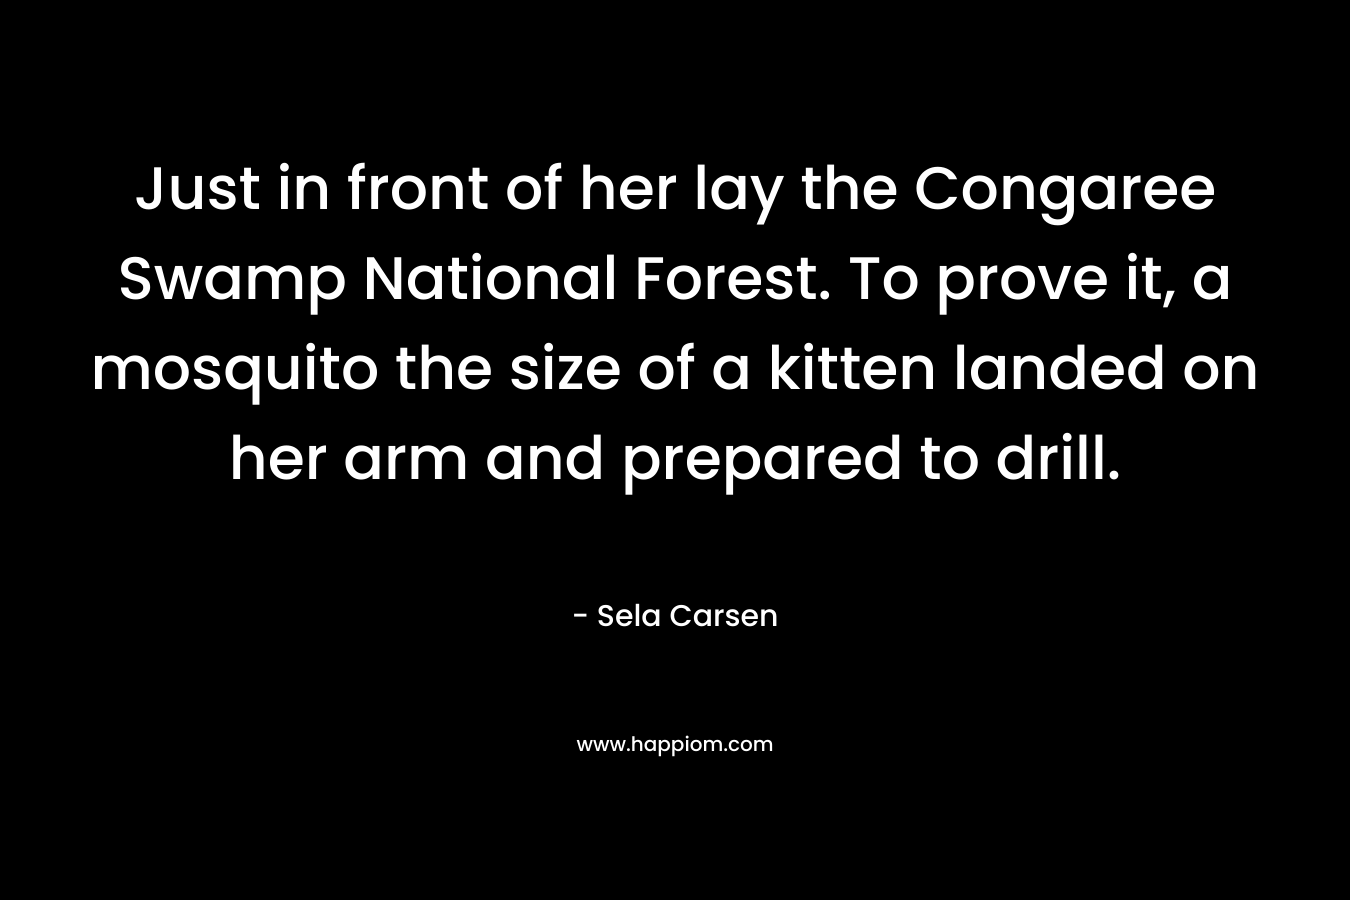 Just in front of her lay the Congaree Swamp National Forest. To prove it, a mosquito the size of a kitten landed on her arm and prepared to drill. – Sela Carsen